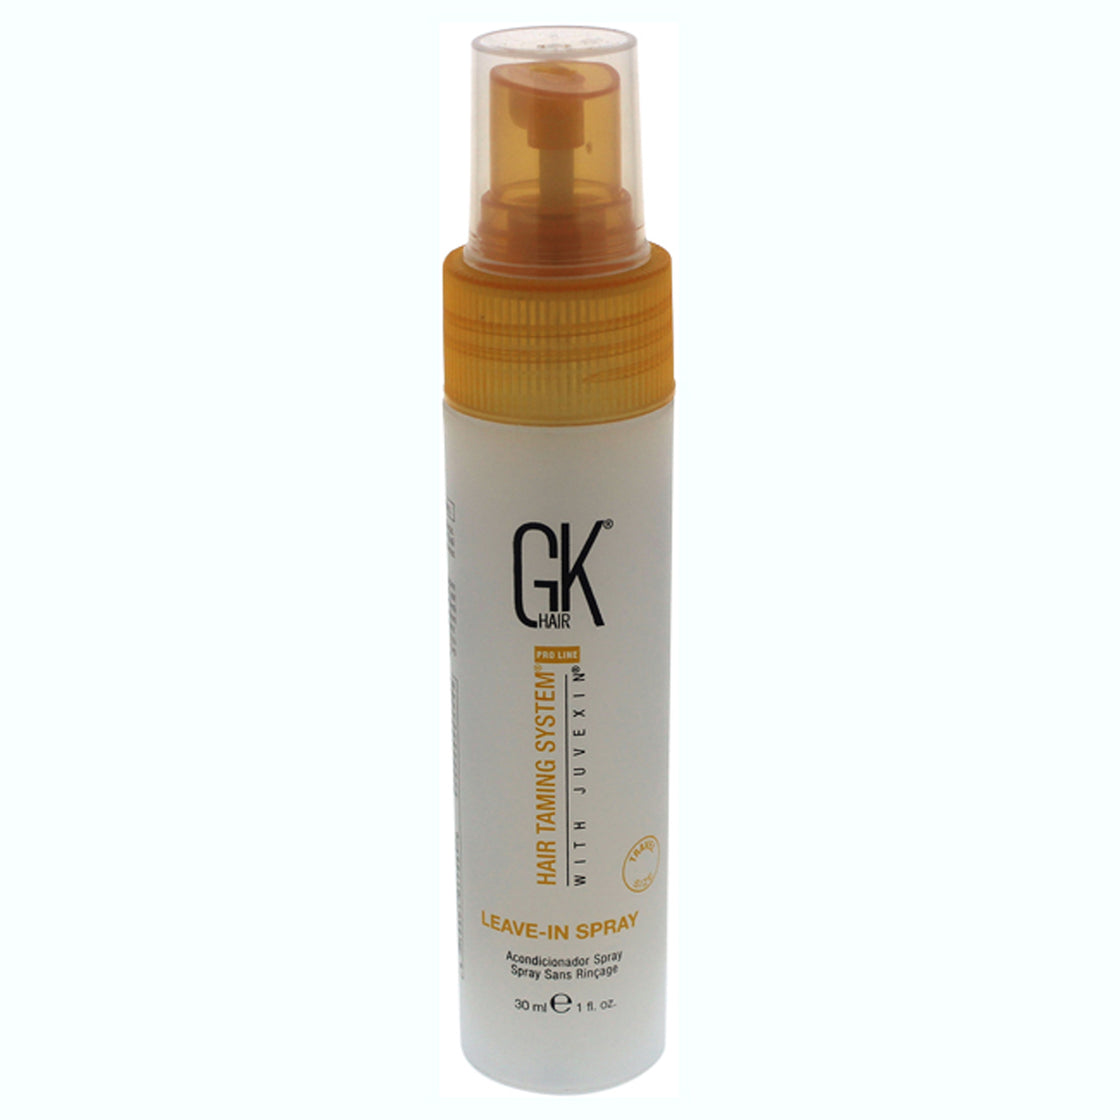 Hair Taming System Leave-In Spray by Global Keratin for Unisex - 1 oz Hair Spray